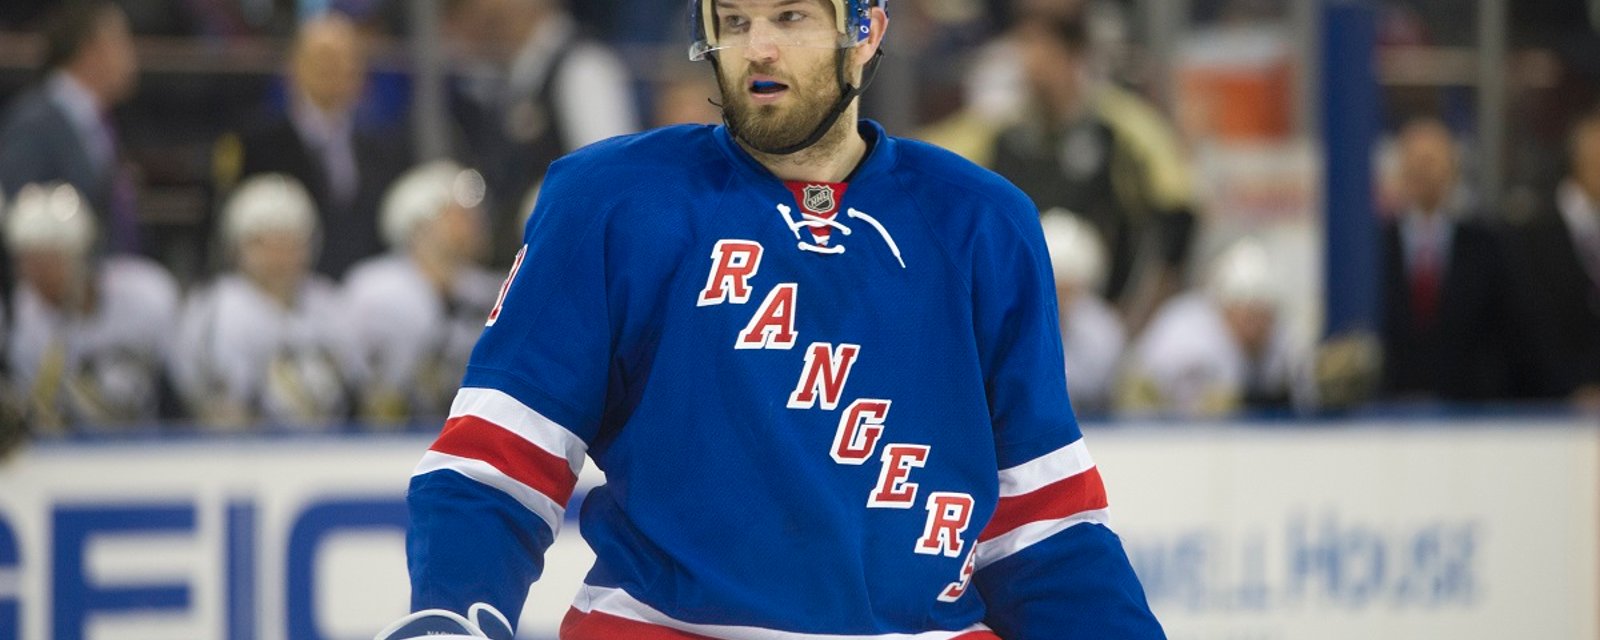 Breaking: Nash admits he's uncertain about his future with the Rangers.